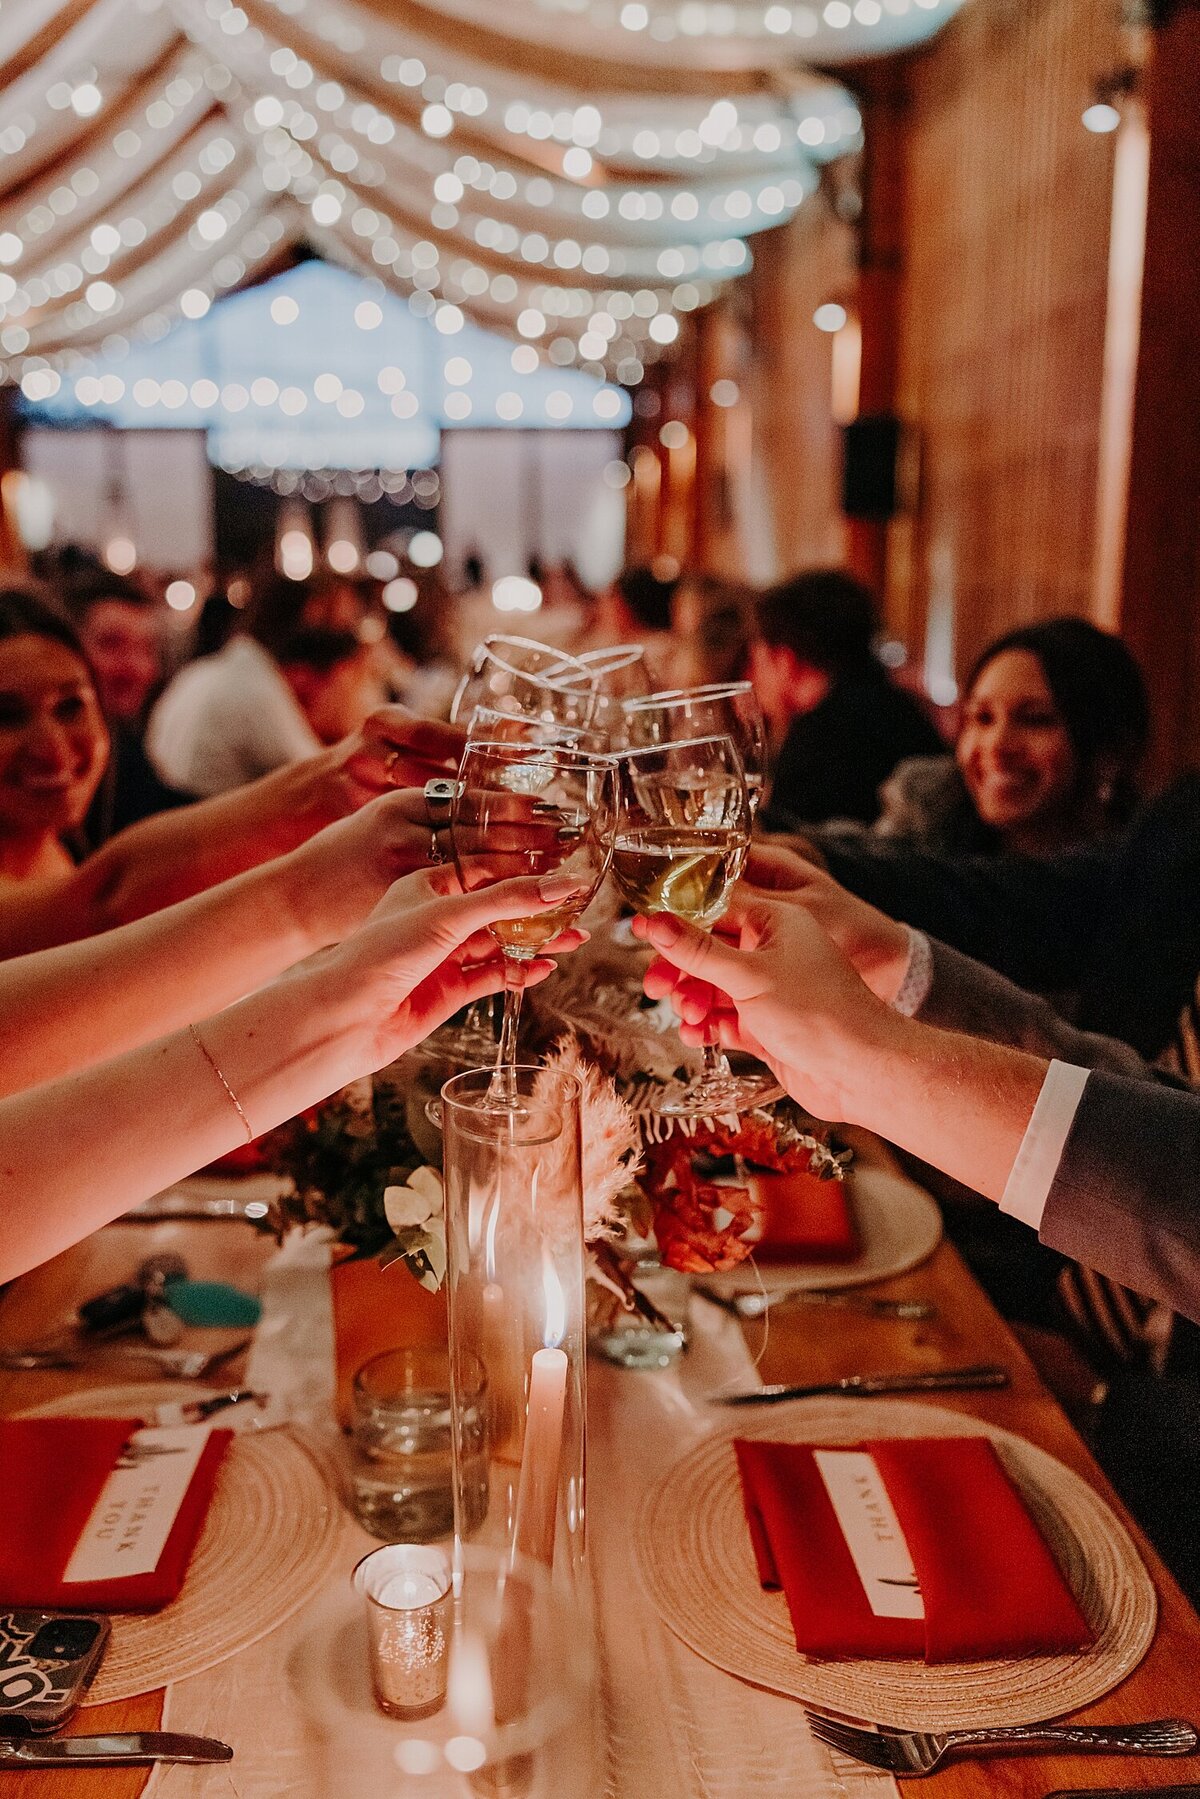 Wedding guests clink champagne glasses at candlelit dinner